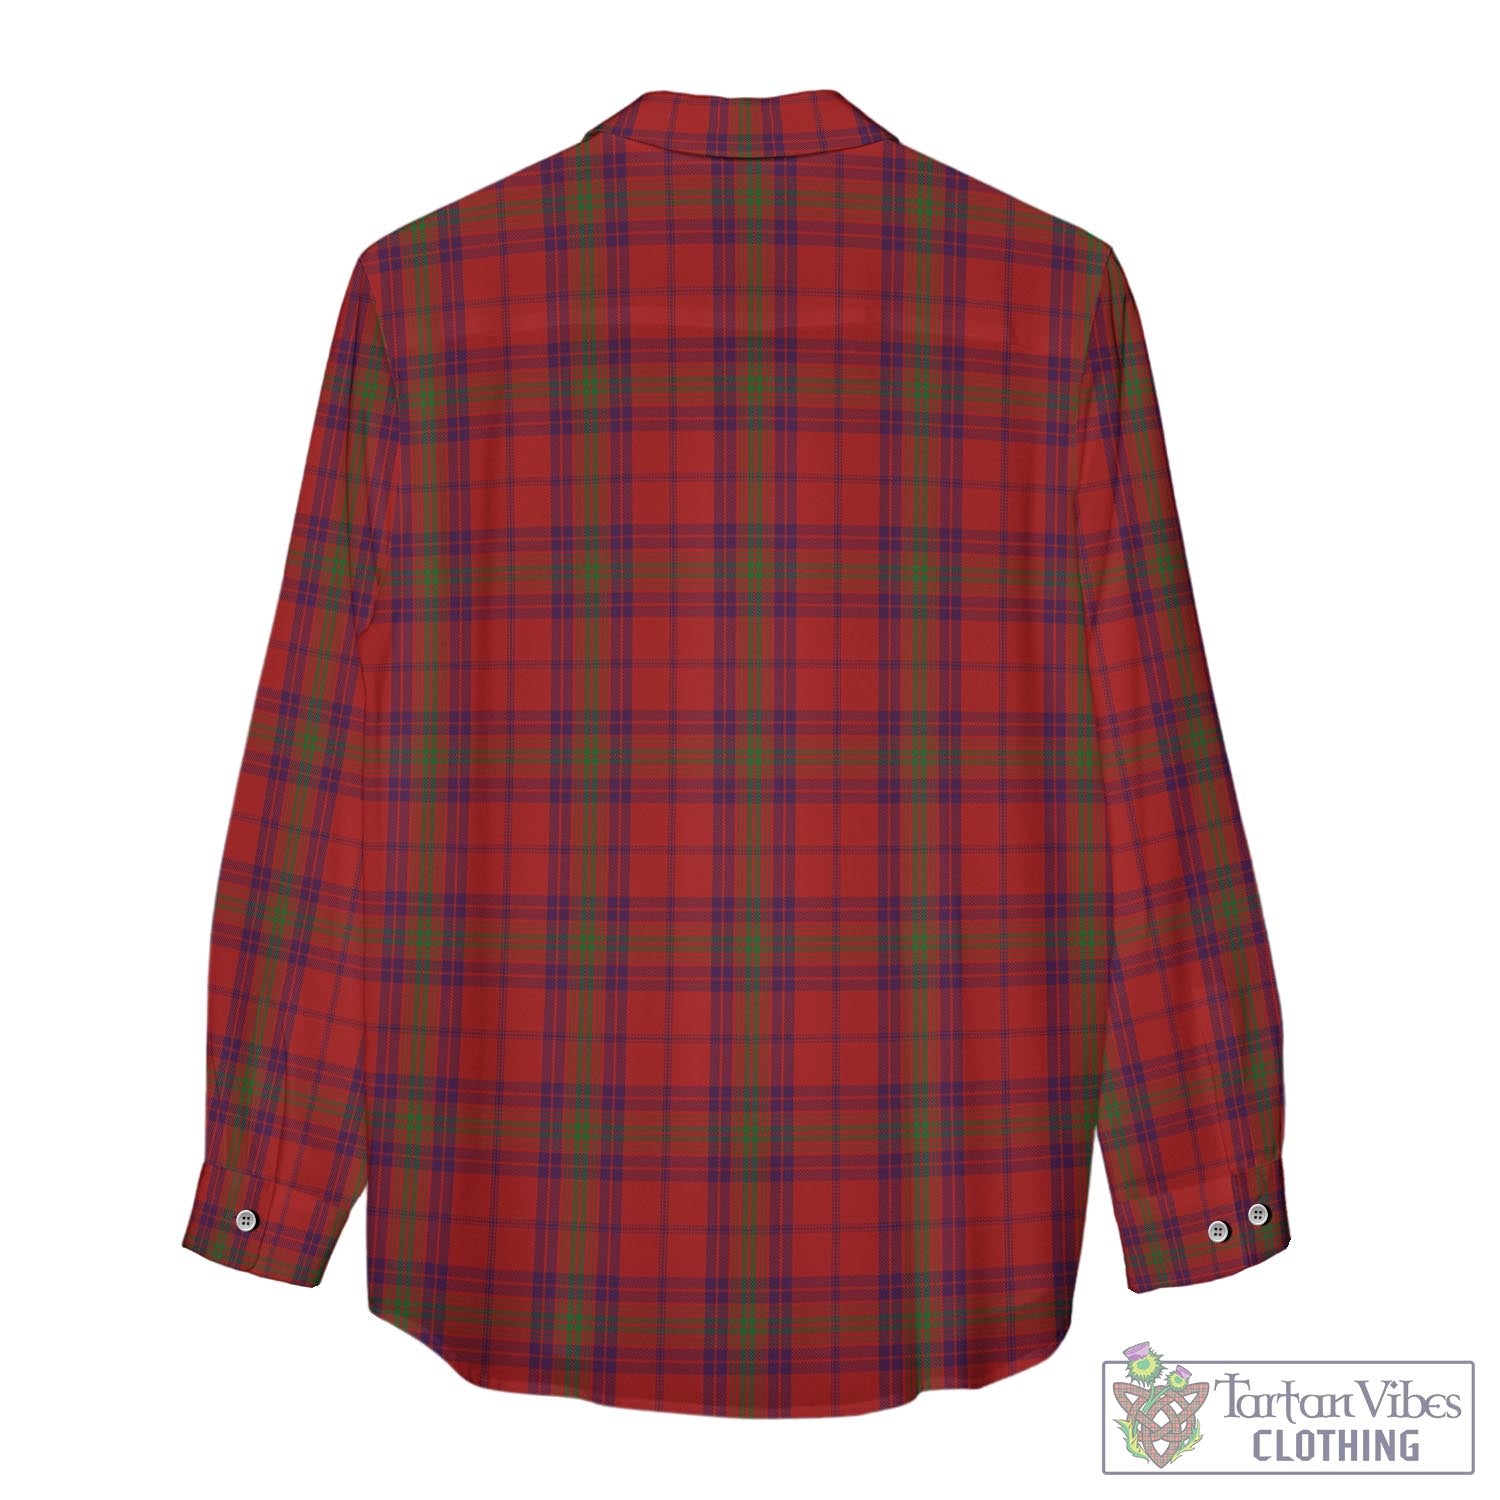 Tartan Vibes Clothing Ross Old Tartan Womens Casual Shirt with Family Crest